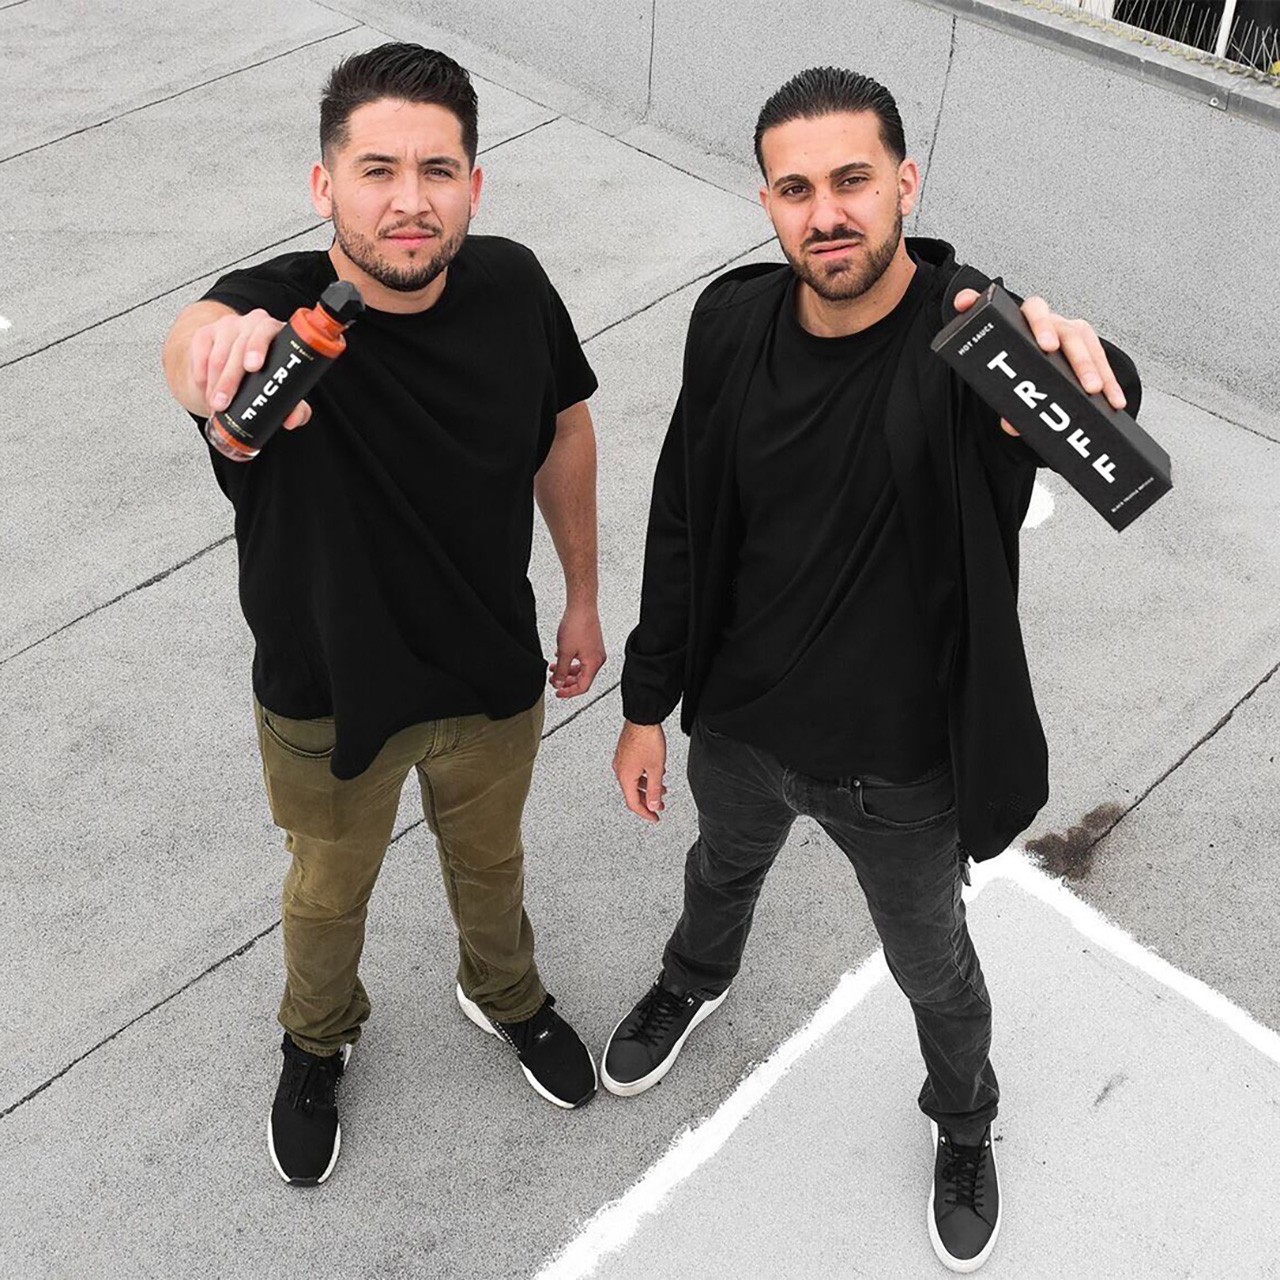 Founder Nick Guillen and Nick Ajluni